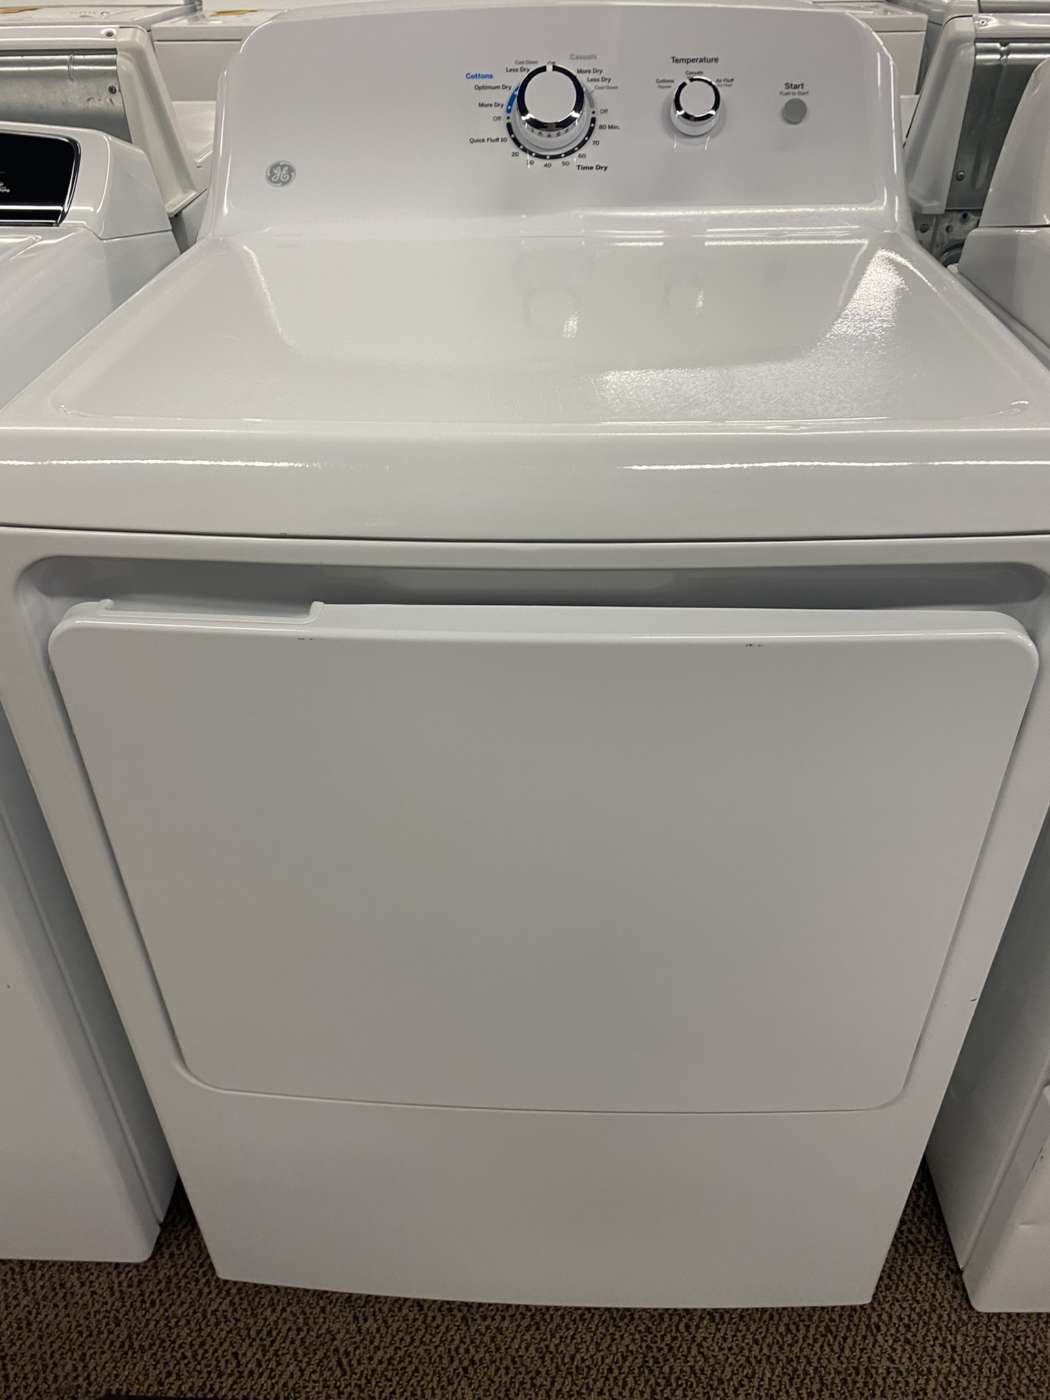 Reconditioned G/E 6.2 Cu. Ft. Electric Dryer – White